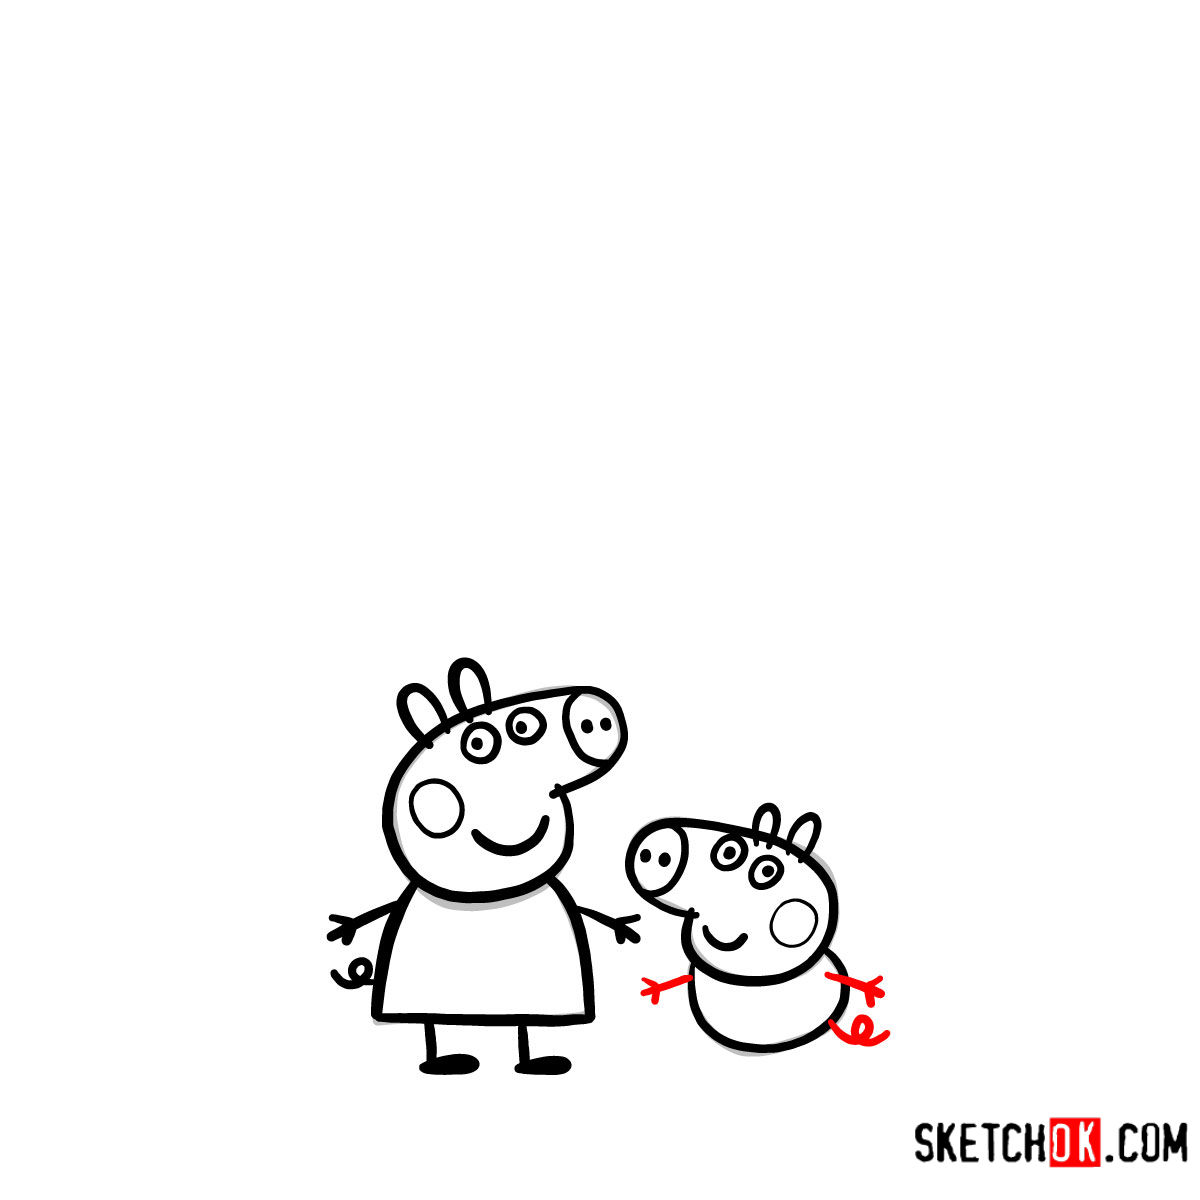 How to draw Peppa Pig's family - step 10